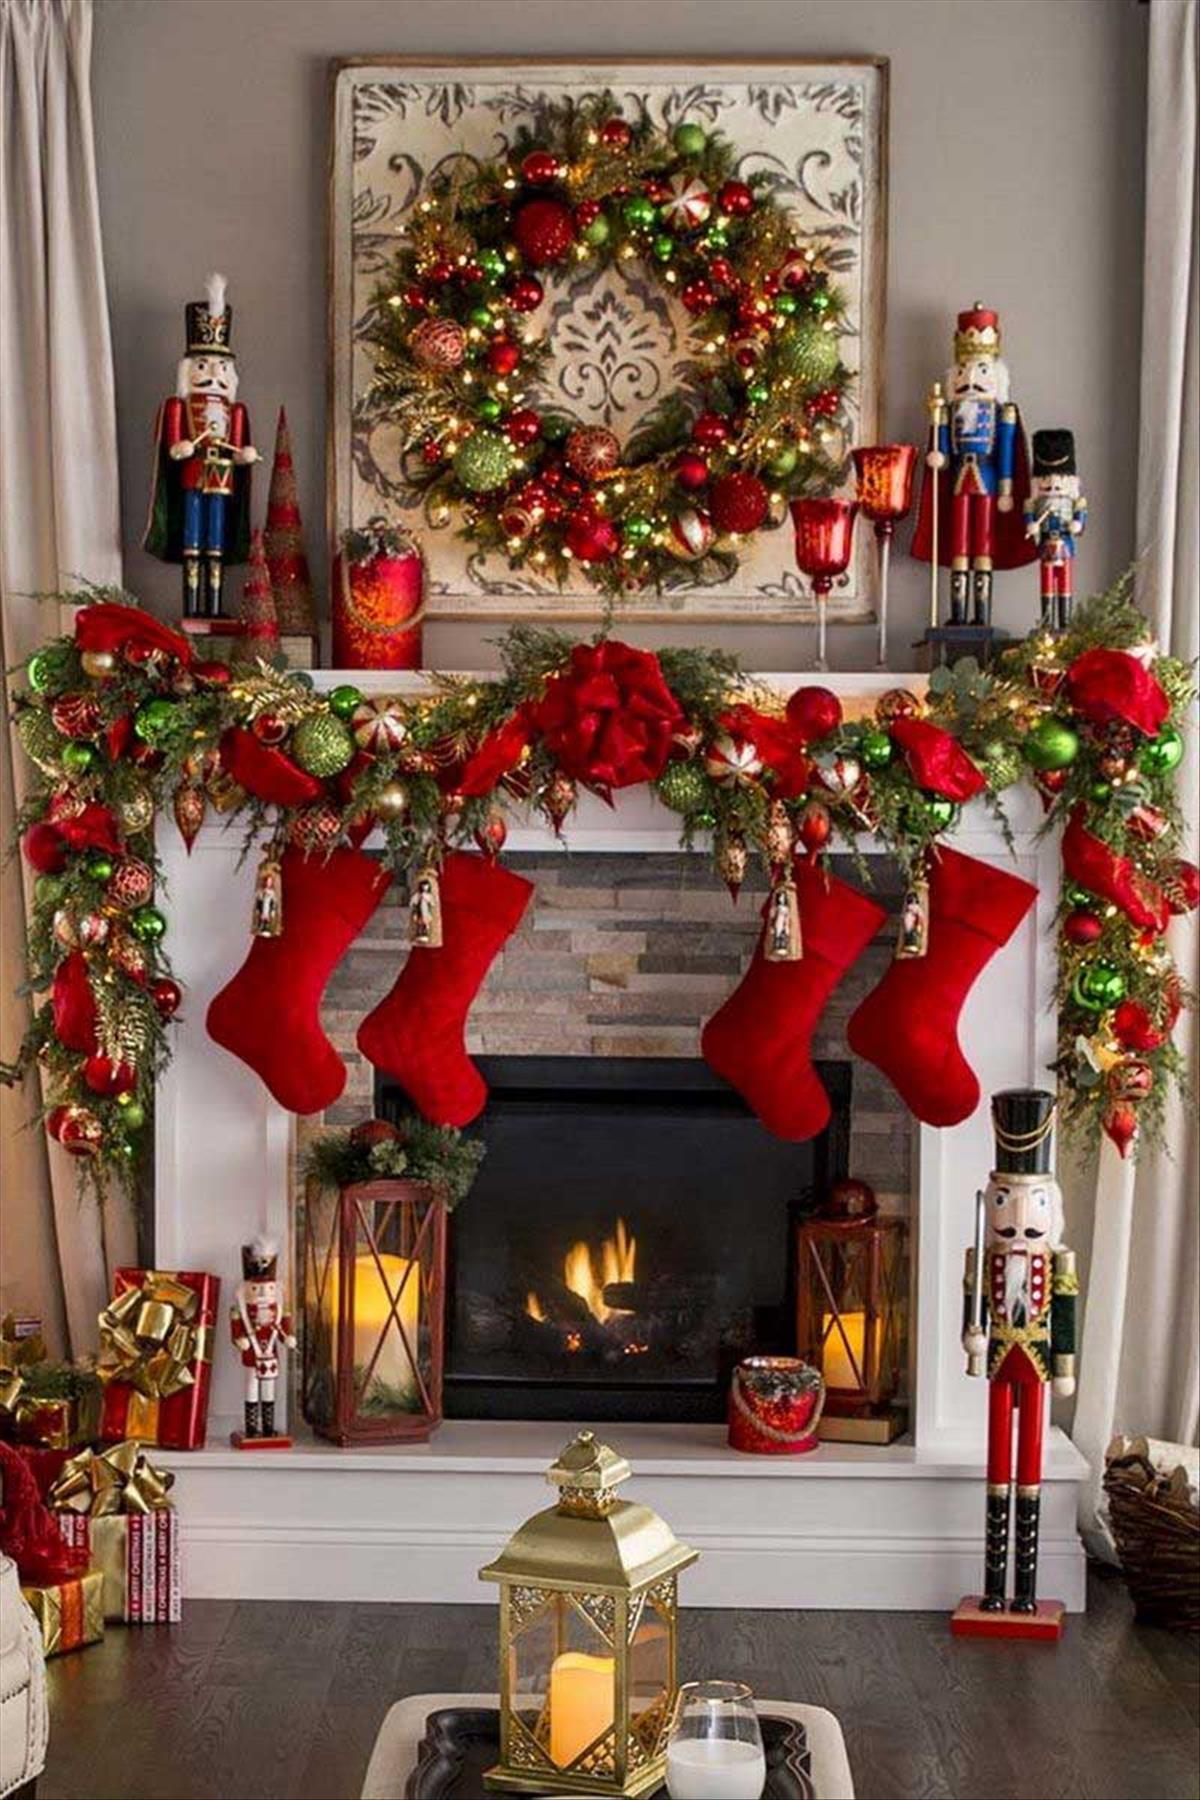 Cozy Christmas fireplace decor ideas to Warm Your Holiday